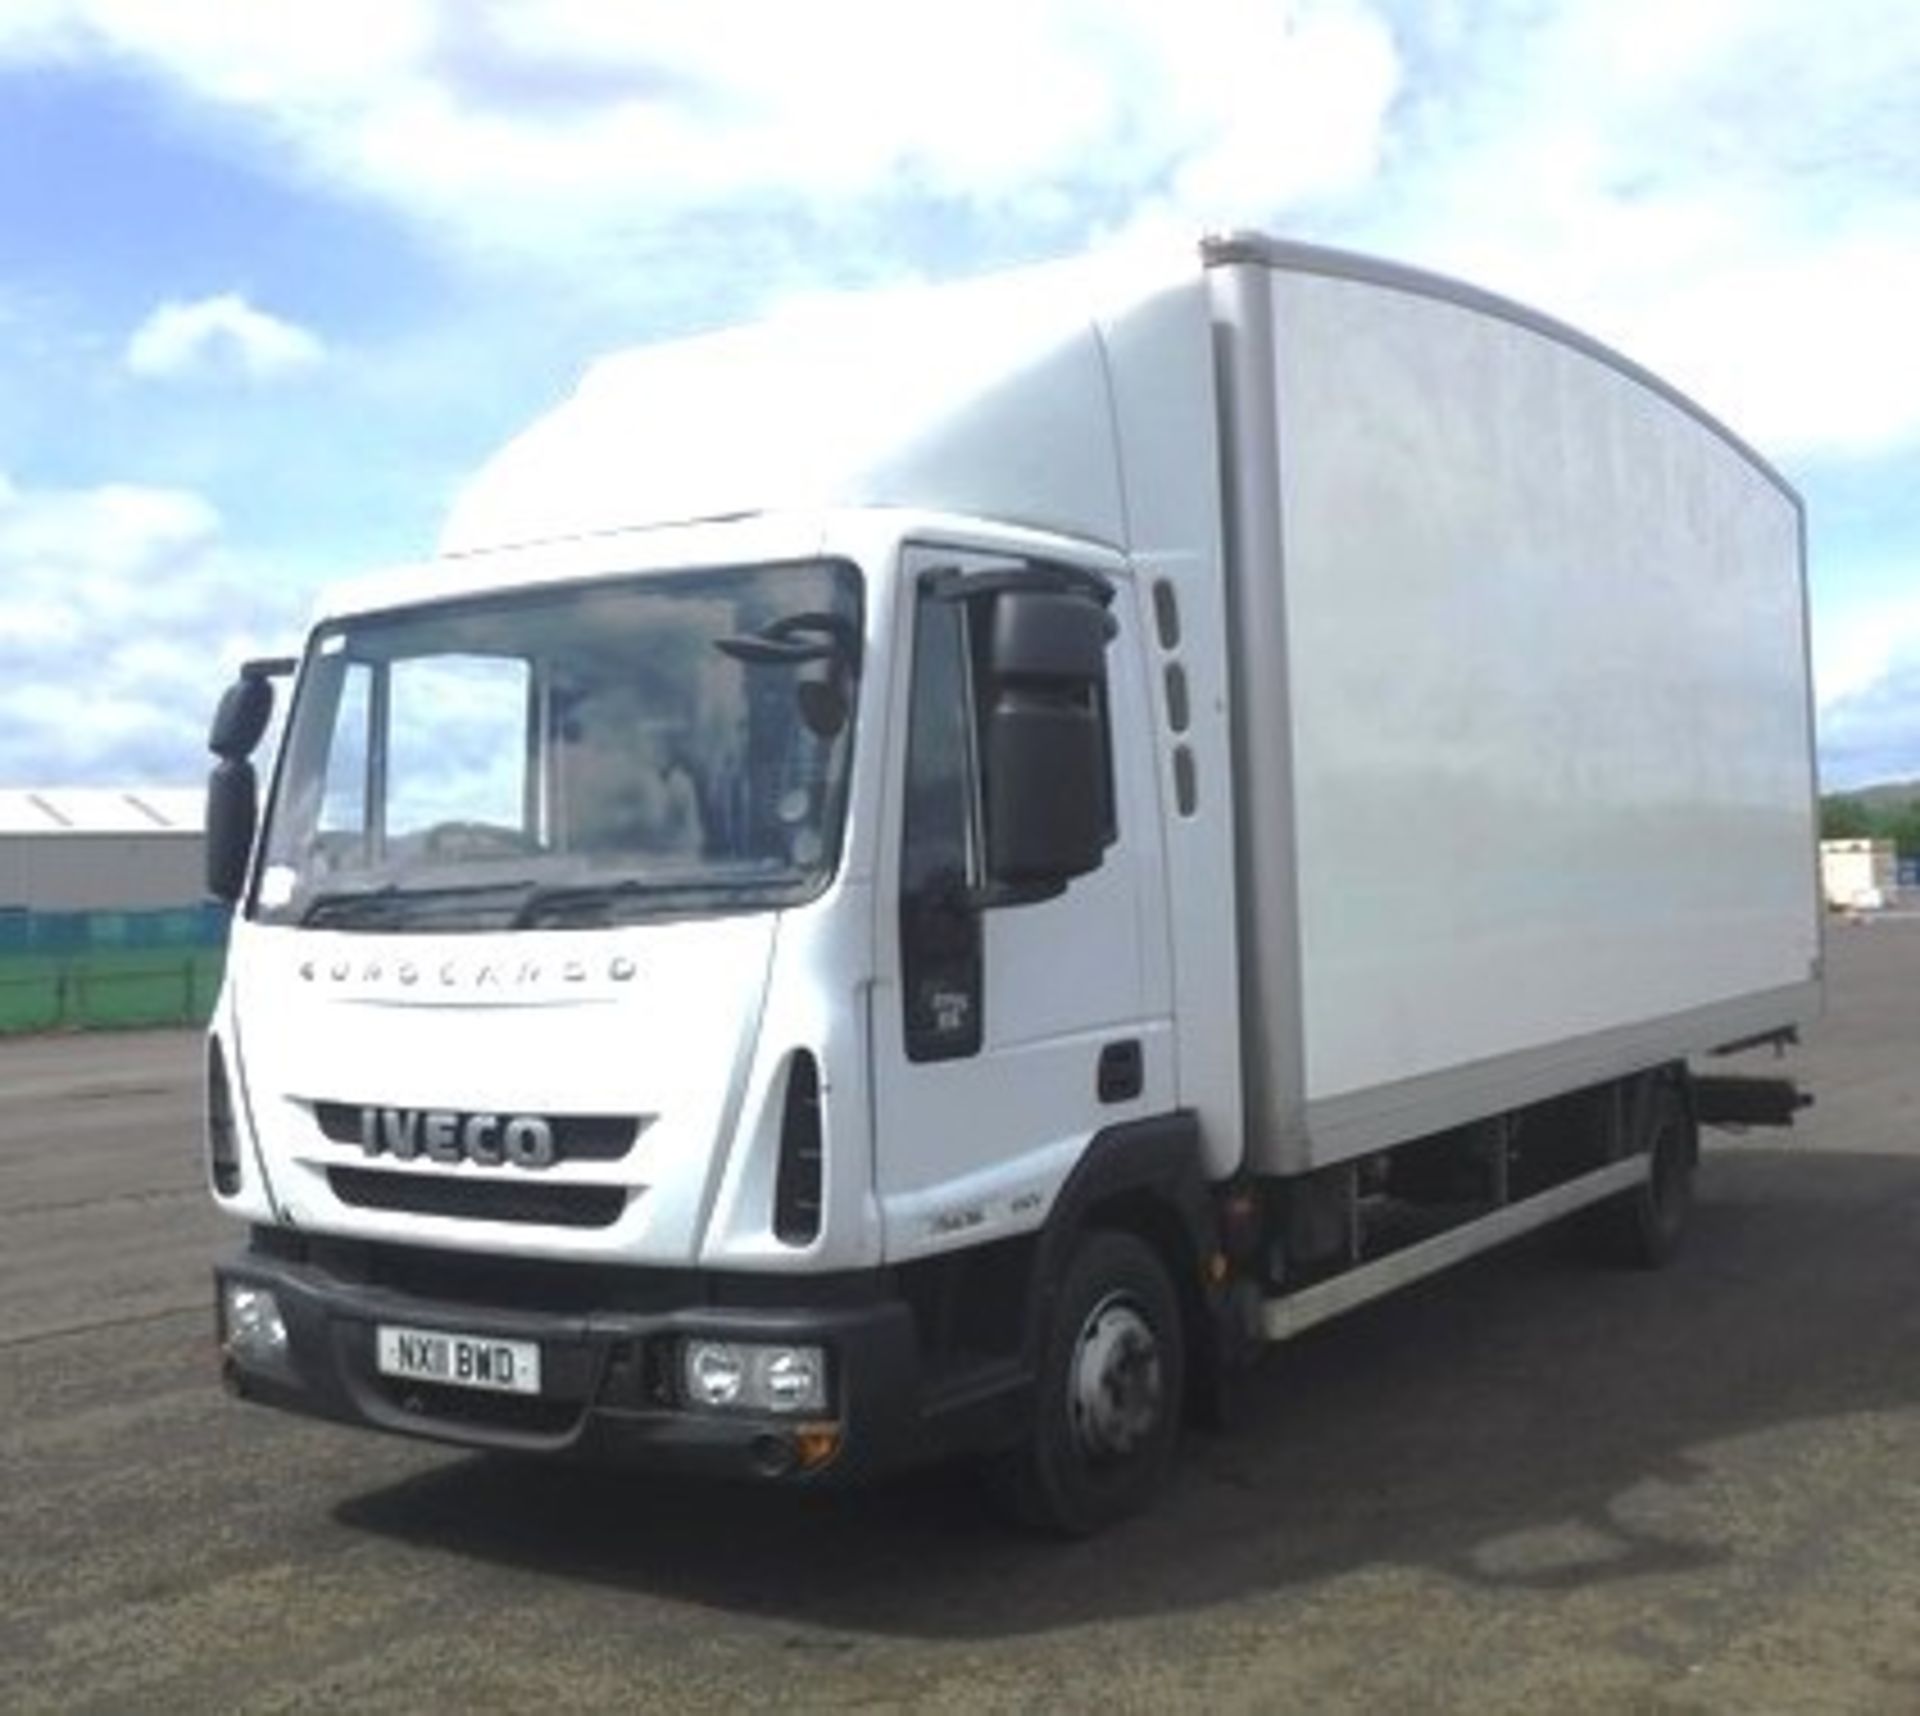 IVECO MODEL EUROCARGO (MY 2008) - 3920cc - Image 2 of 27